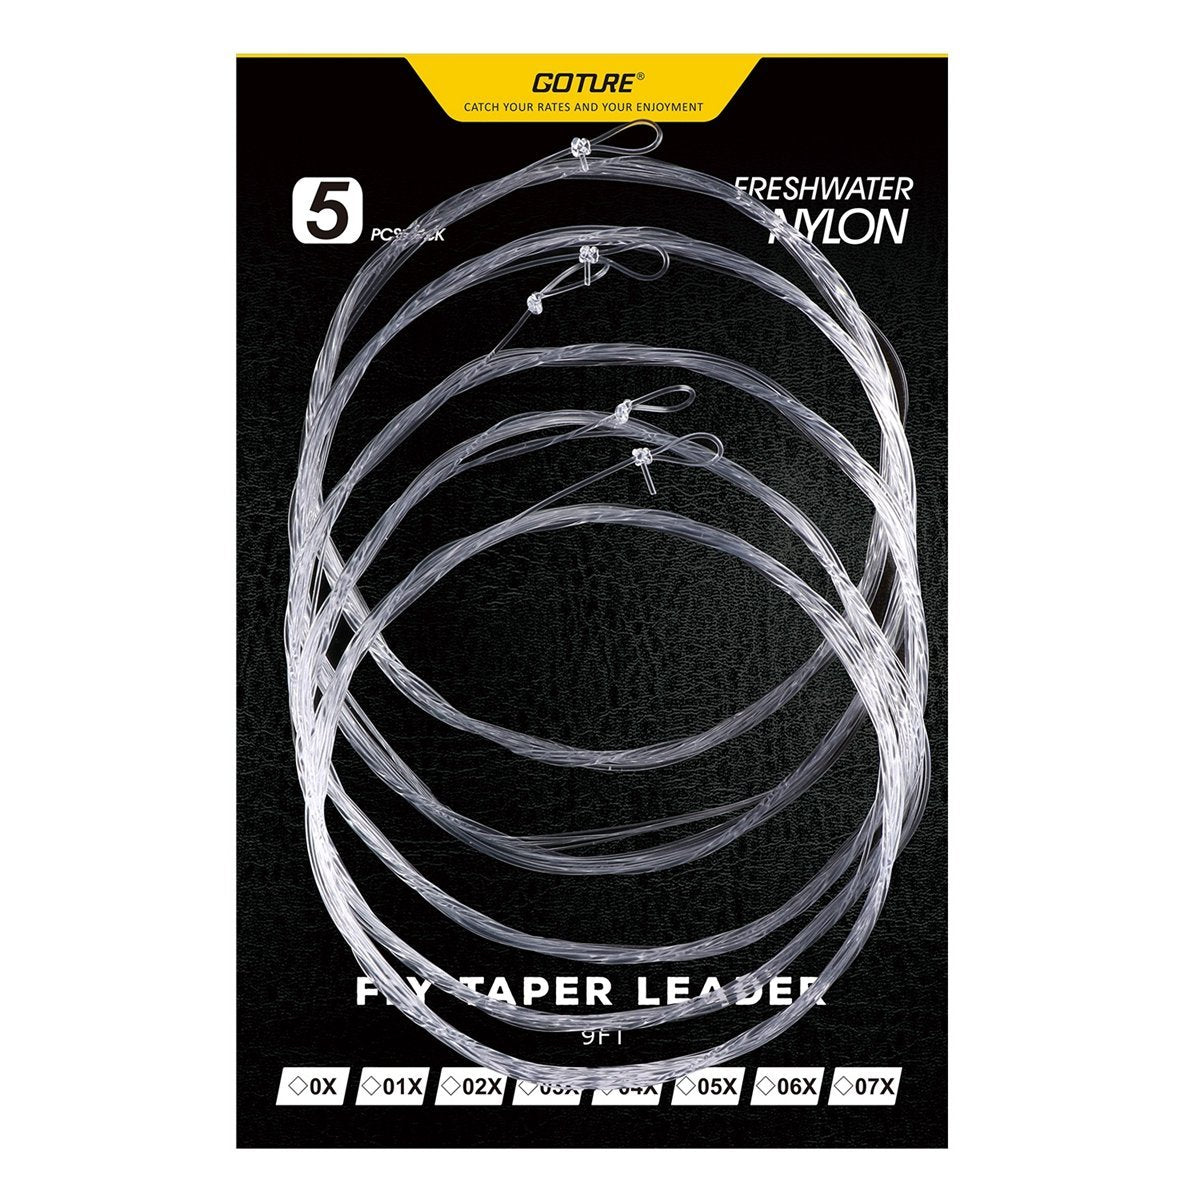 5-PC Clear Nylon Fly Fishing Tapered Leader with Loop - GOTURE